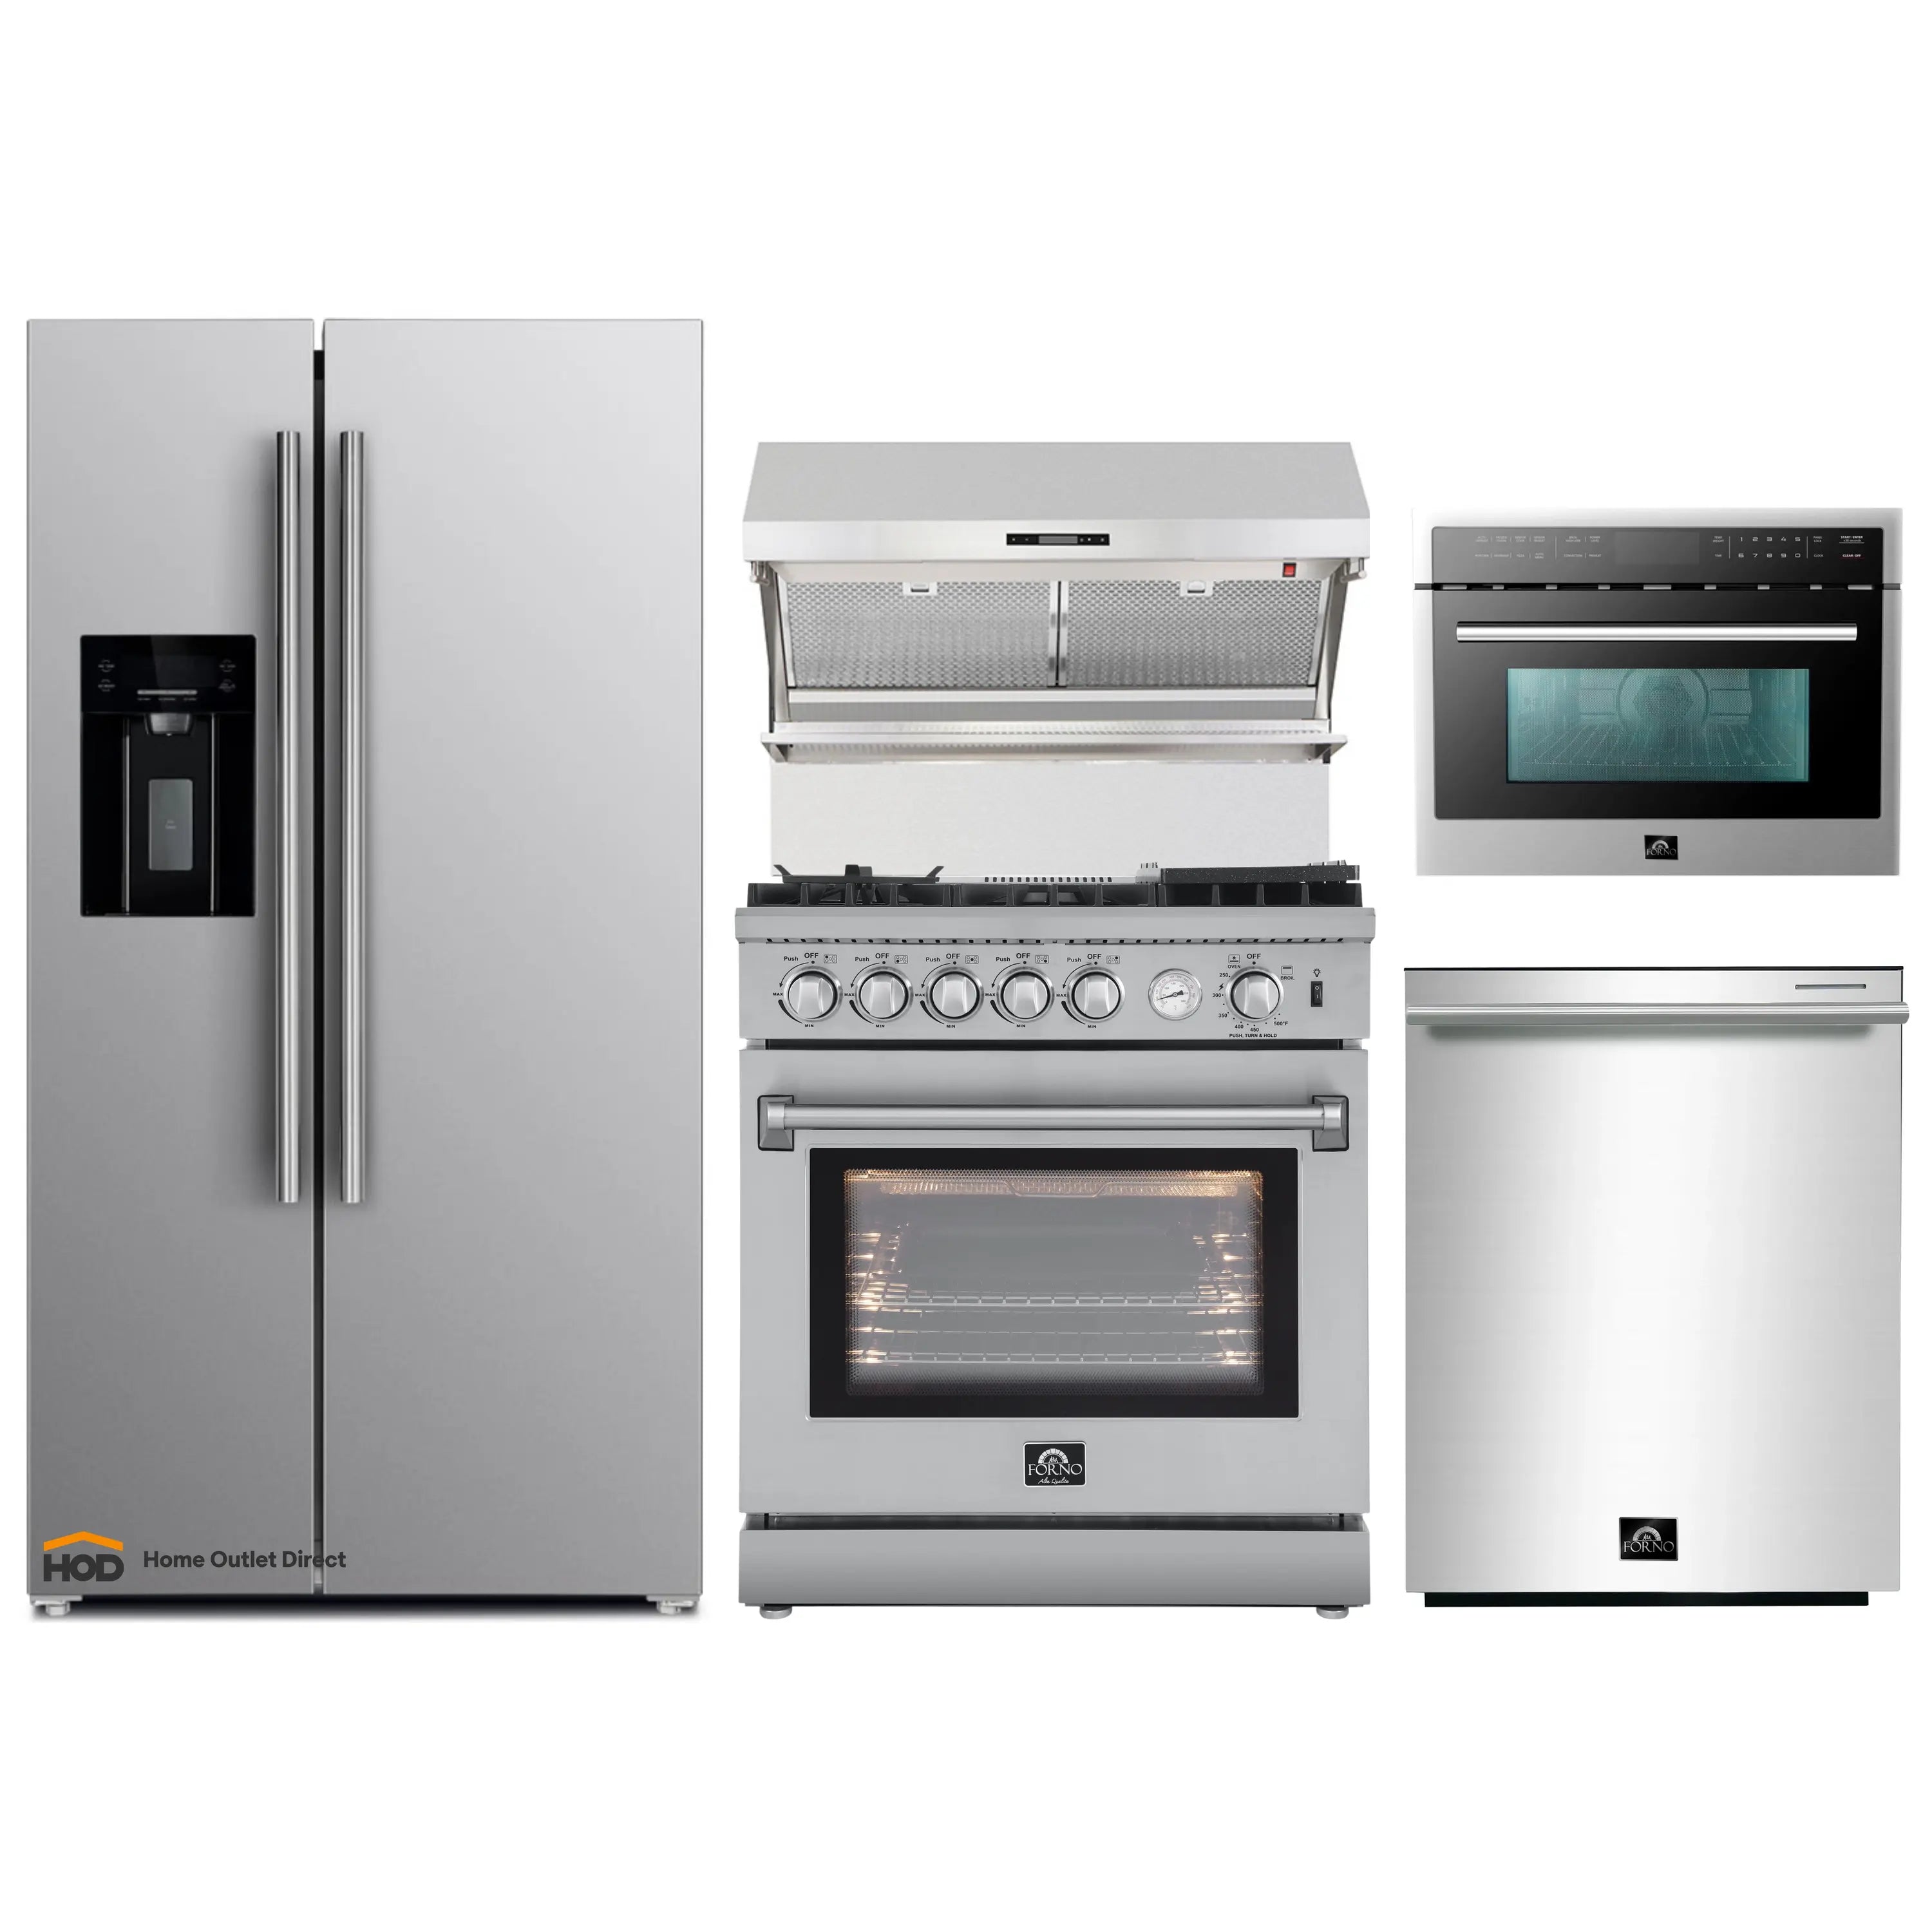 Forno 5-Piece Appliance Package - 30-Inch Gas Range with Air Fryer, Refrigerator with Water Dispenser, Wall Mount Hood with Backsplash, Microwave Oven, & 3-Rack Dishwasher in Stainless Steel